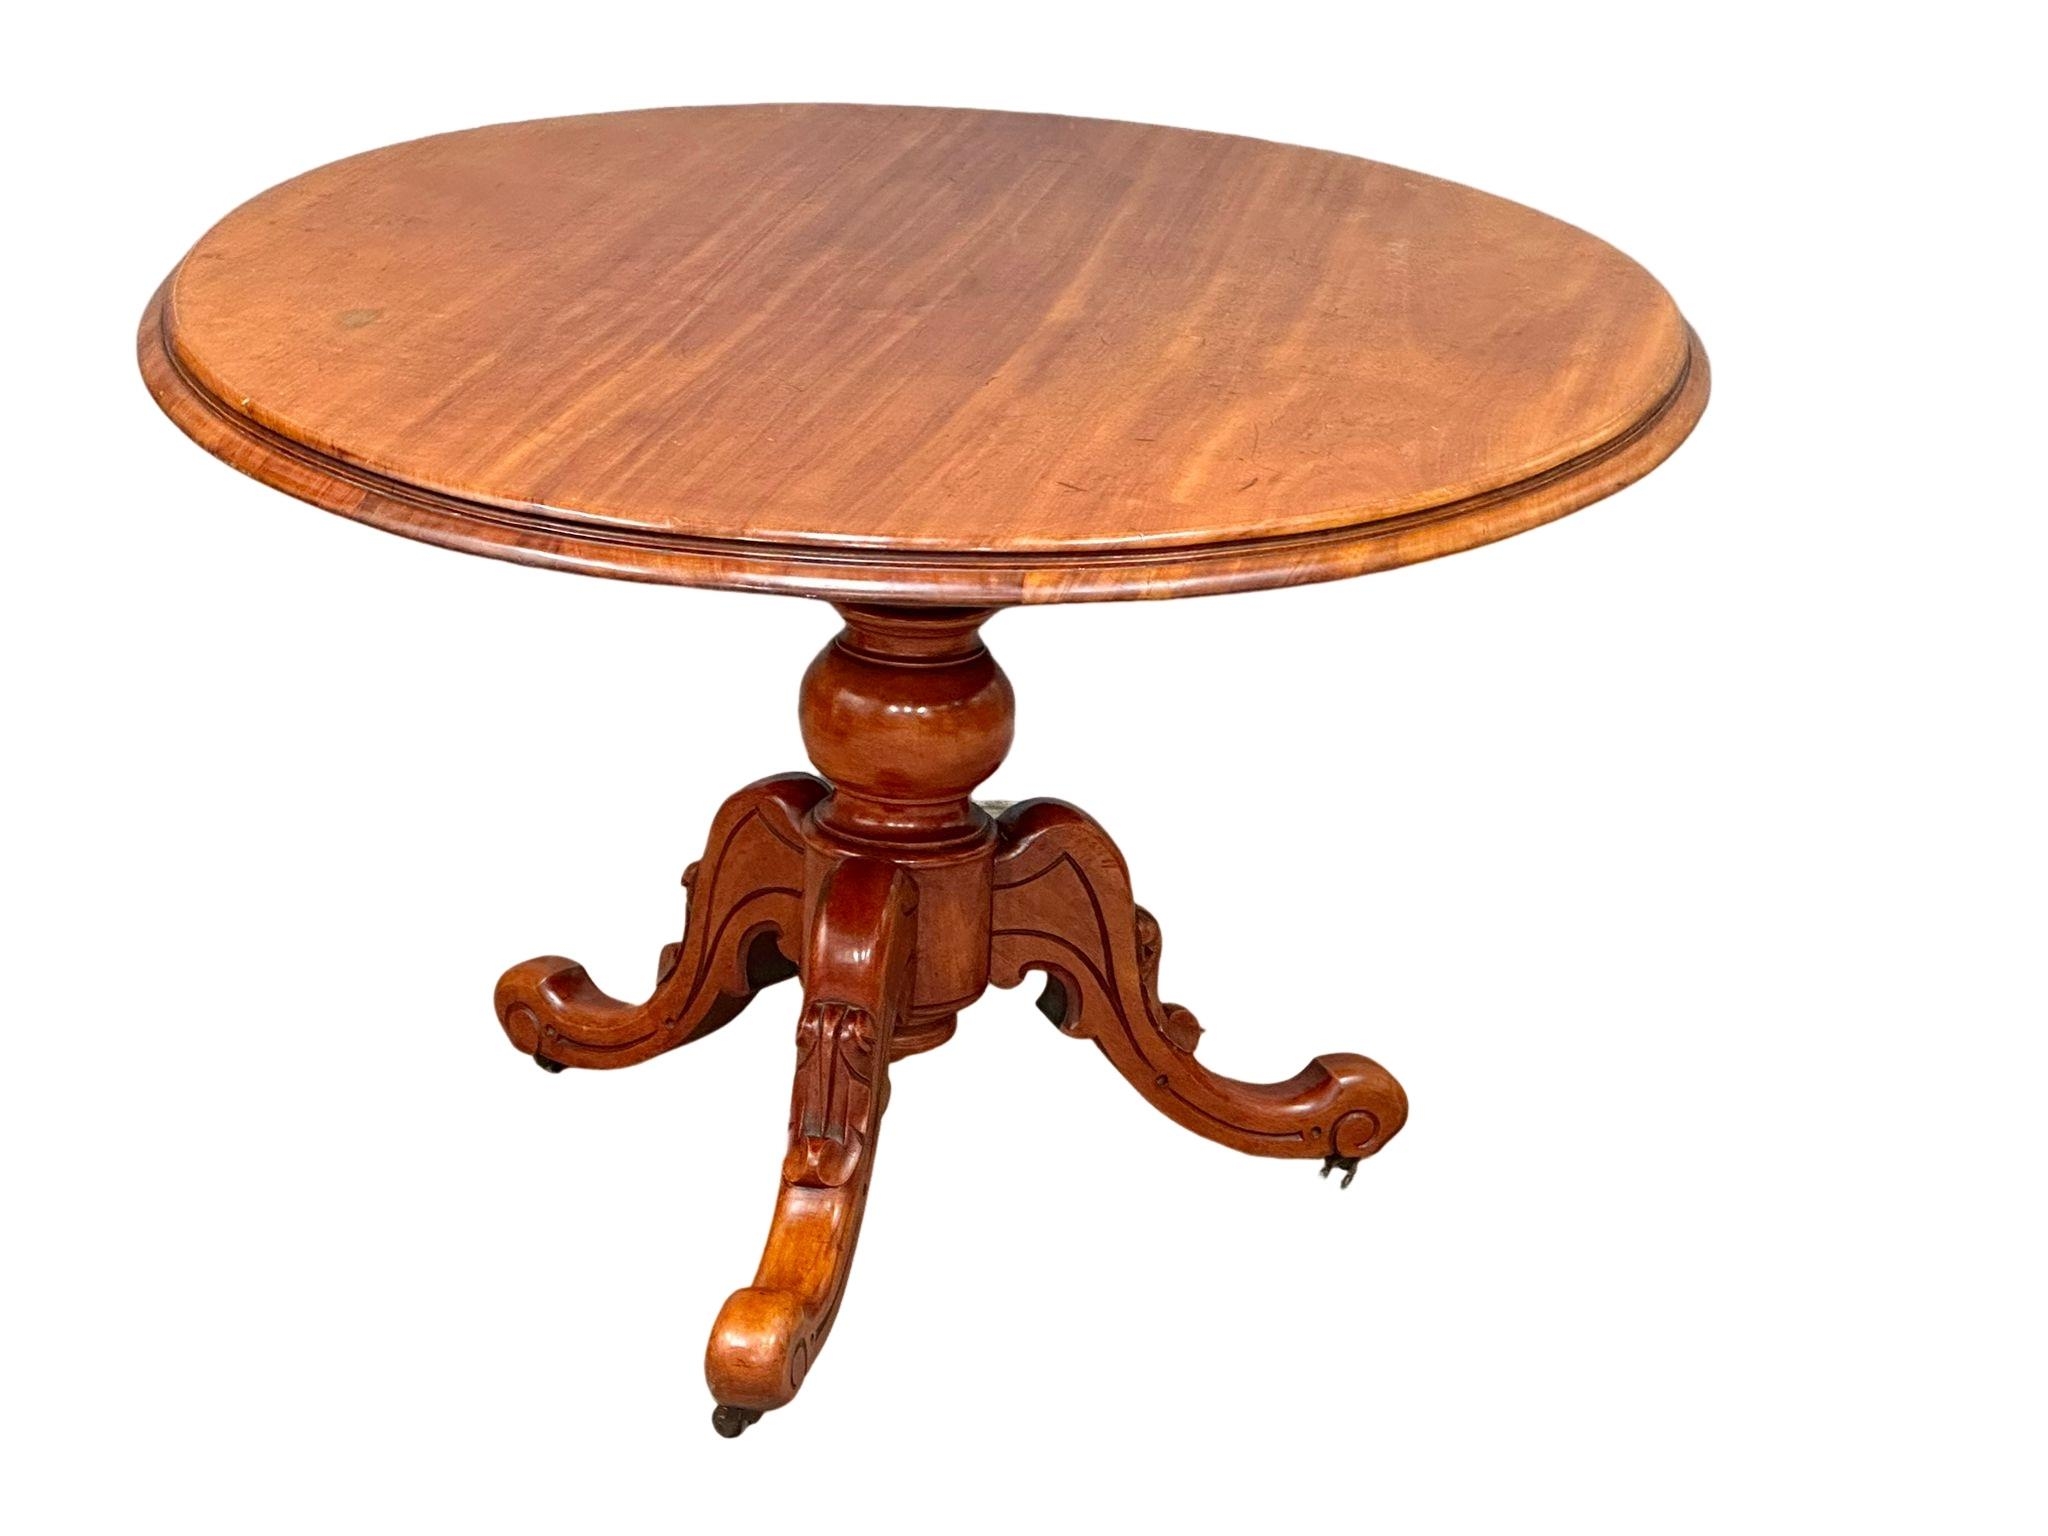 A Victorian tilt top pedestal breakfast table/dining table on cabriole legs, 137cm x 112cm x 75cm - Image 10 of 10